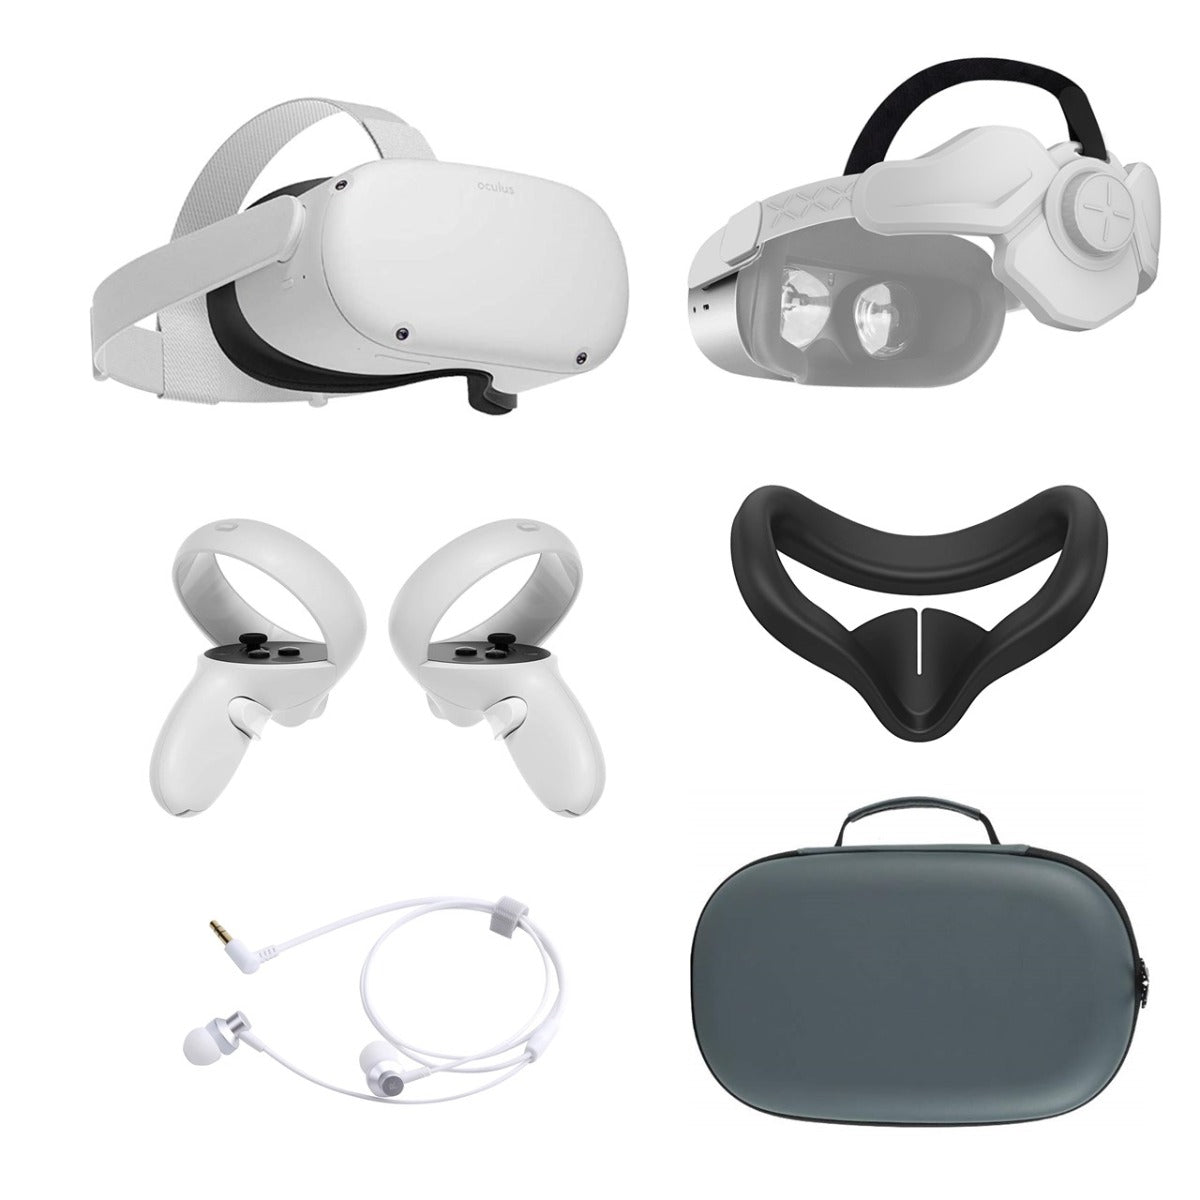 2021 Oculus Quest 2 All-In-One VR Headset, Touch Controllers, 128GB SSD, 1832x1920 up to 90 Hz Refresh Rate LCD, 3D Audio, Mytrix Head Strap, Carrying Case, Earphone